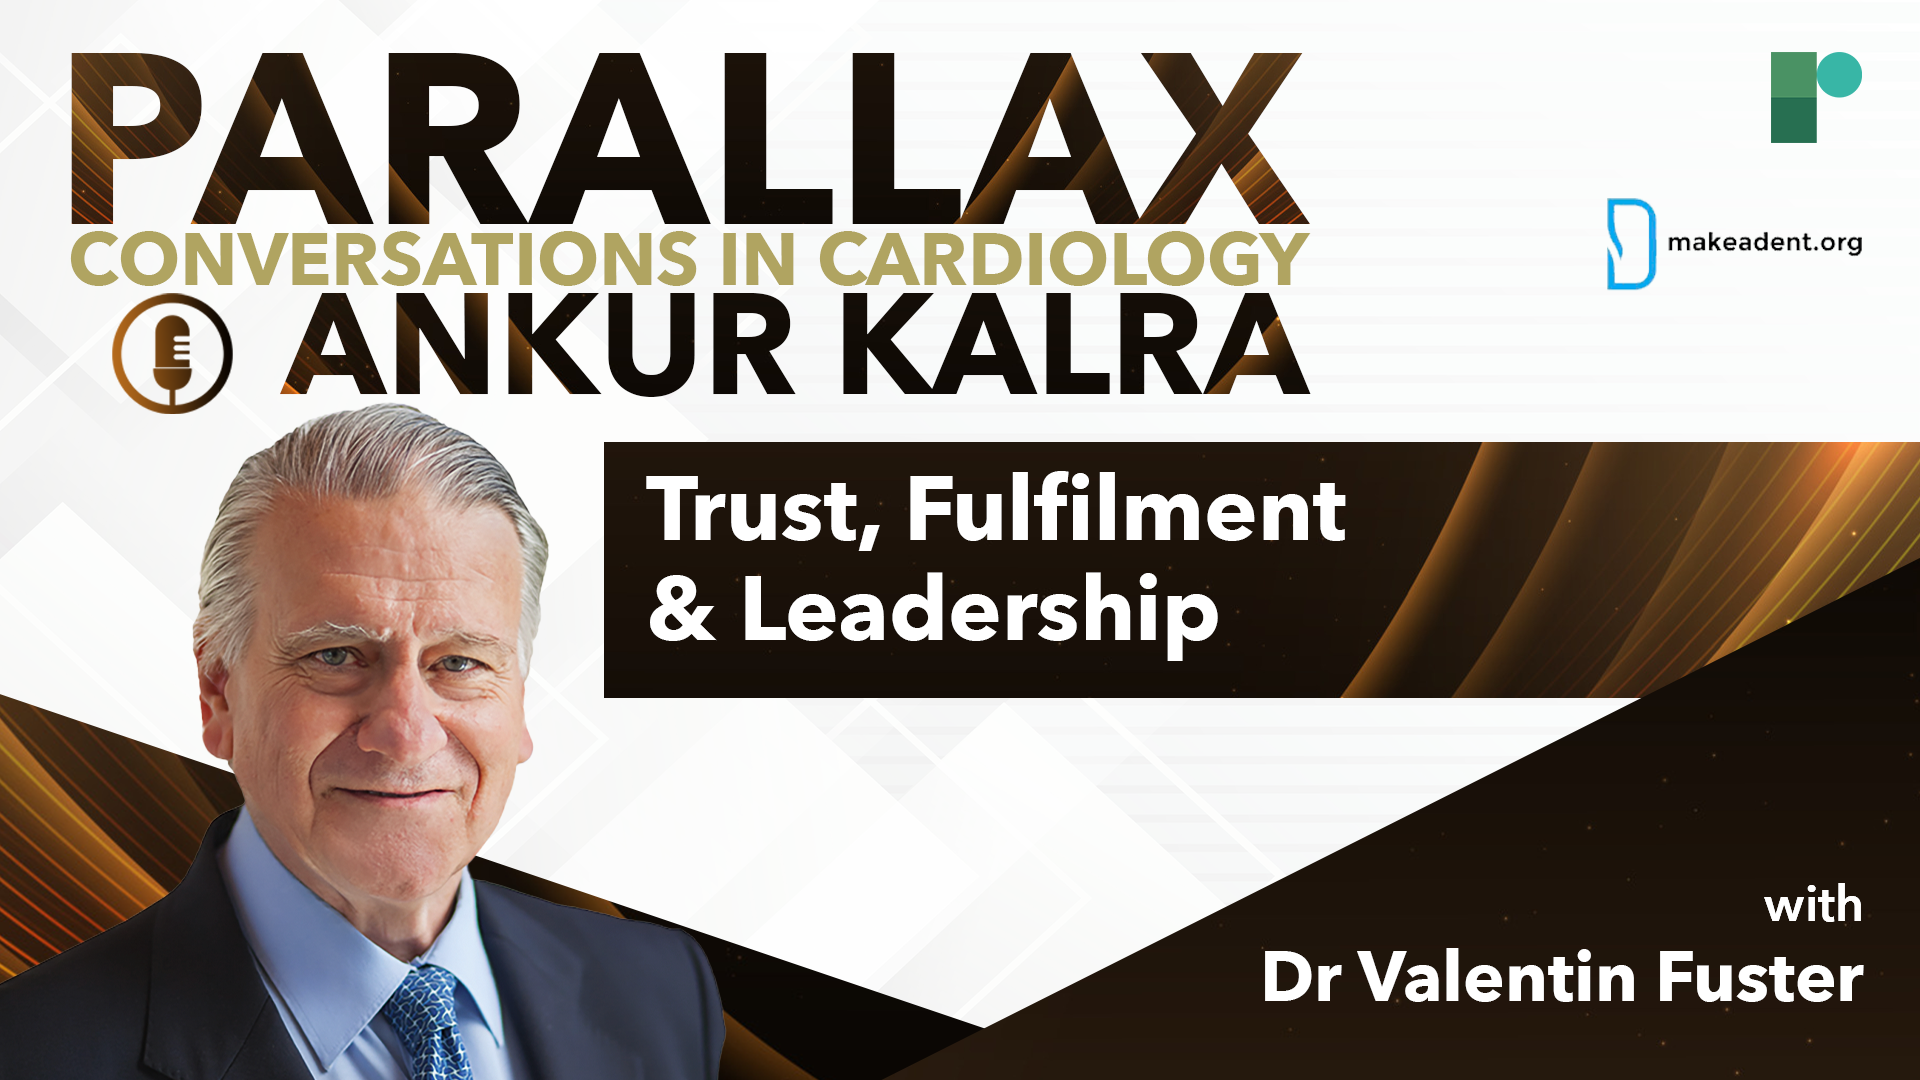 EP 100: Conversation with Dr Valentin Fuster: Trust, Fulfilment & Leadership